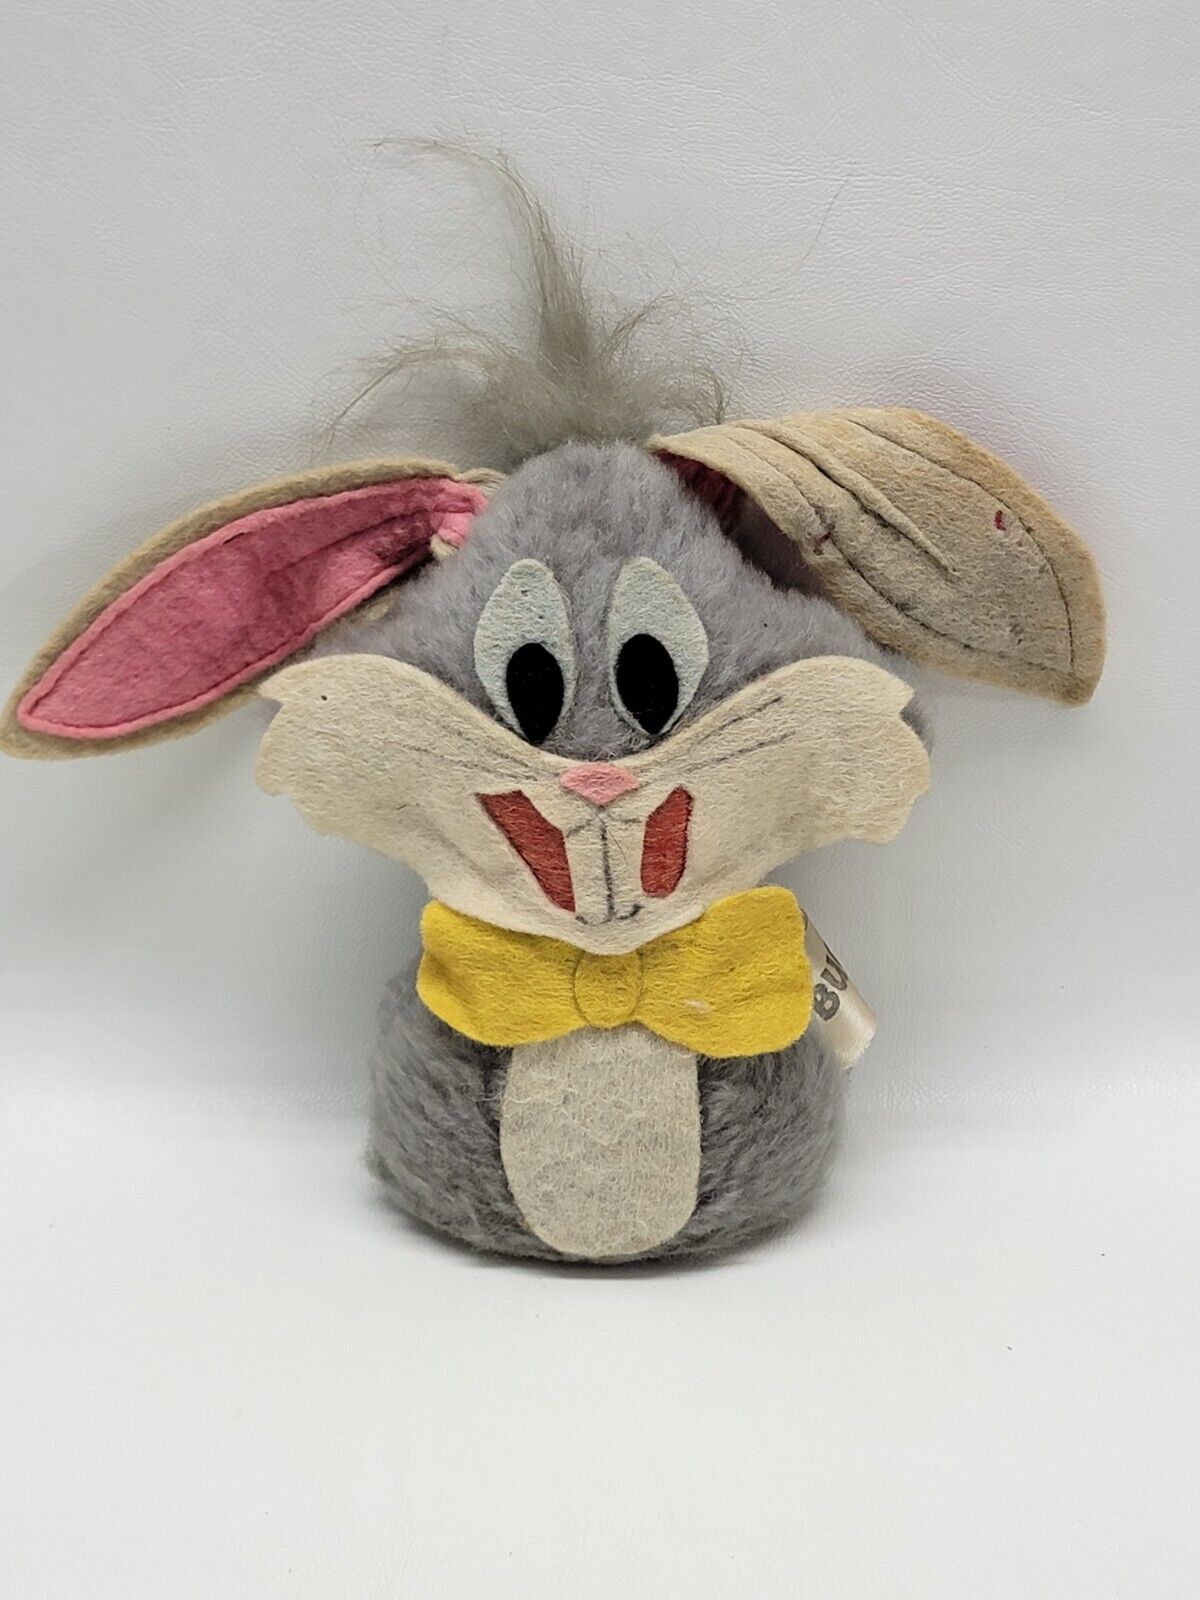 Vintage 1975 Bugs Bunny Sand Weighted Plush Warner Bros Russ Berrie & Co